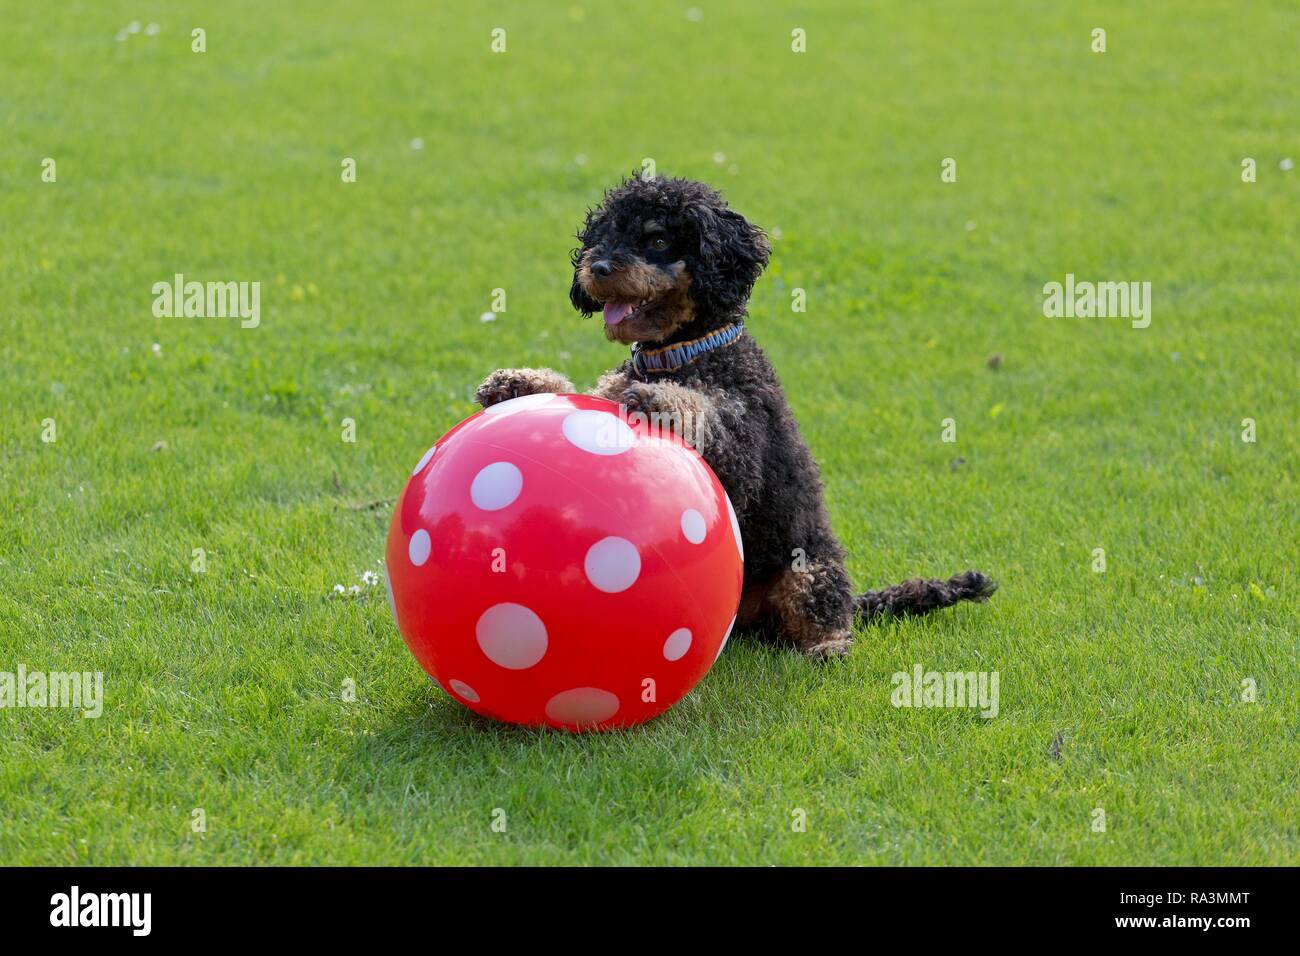 Small poodle sitting up and begging with ball, Germany Stock Photo